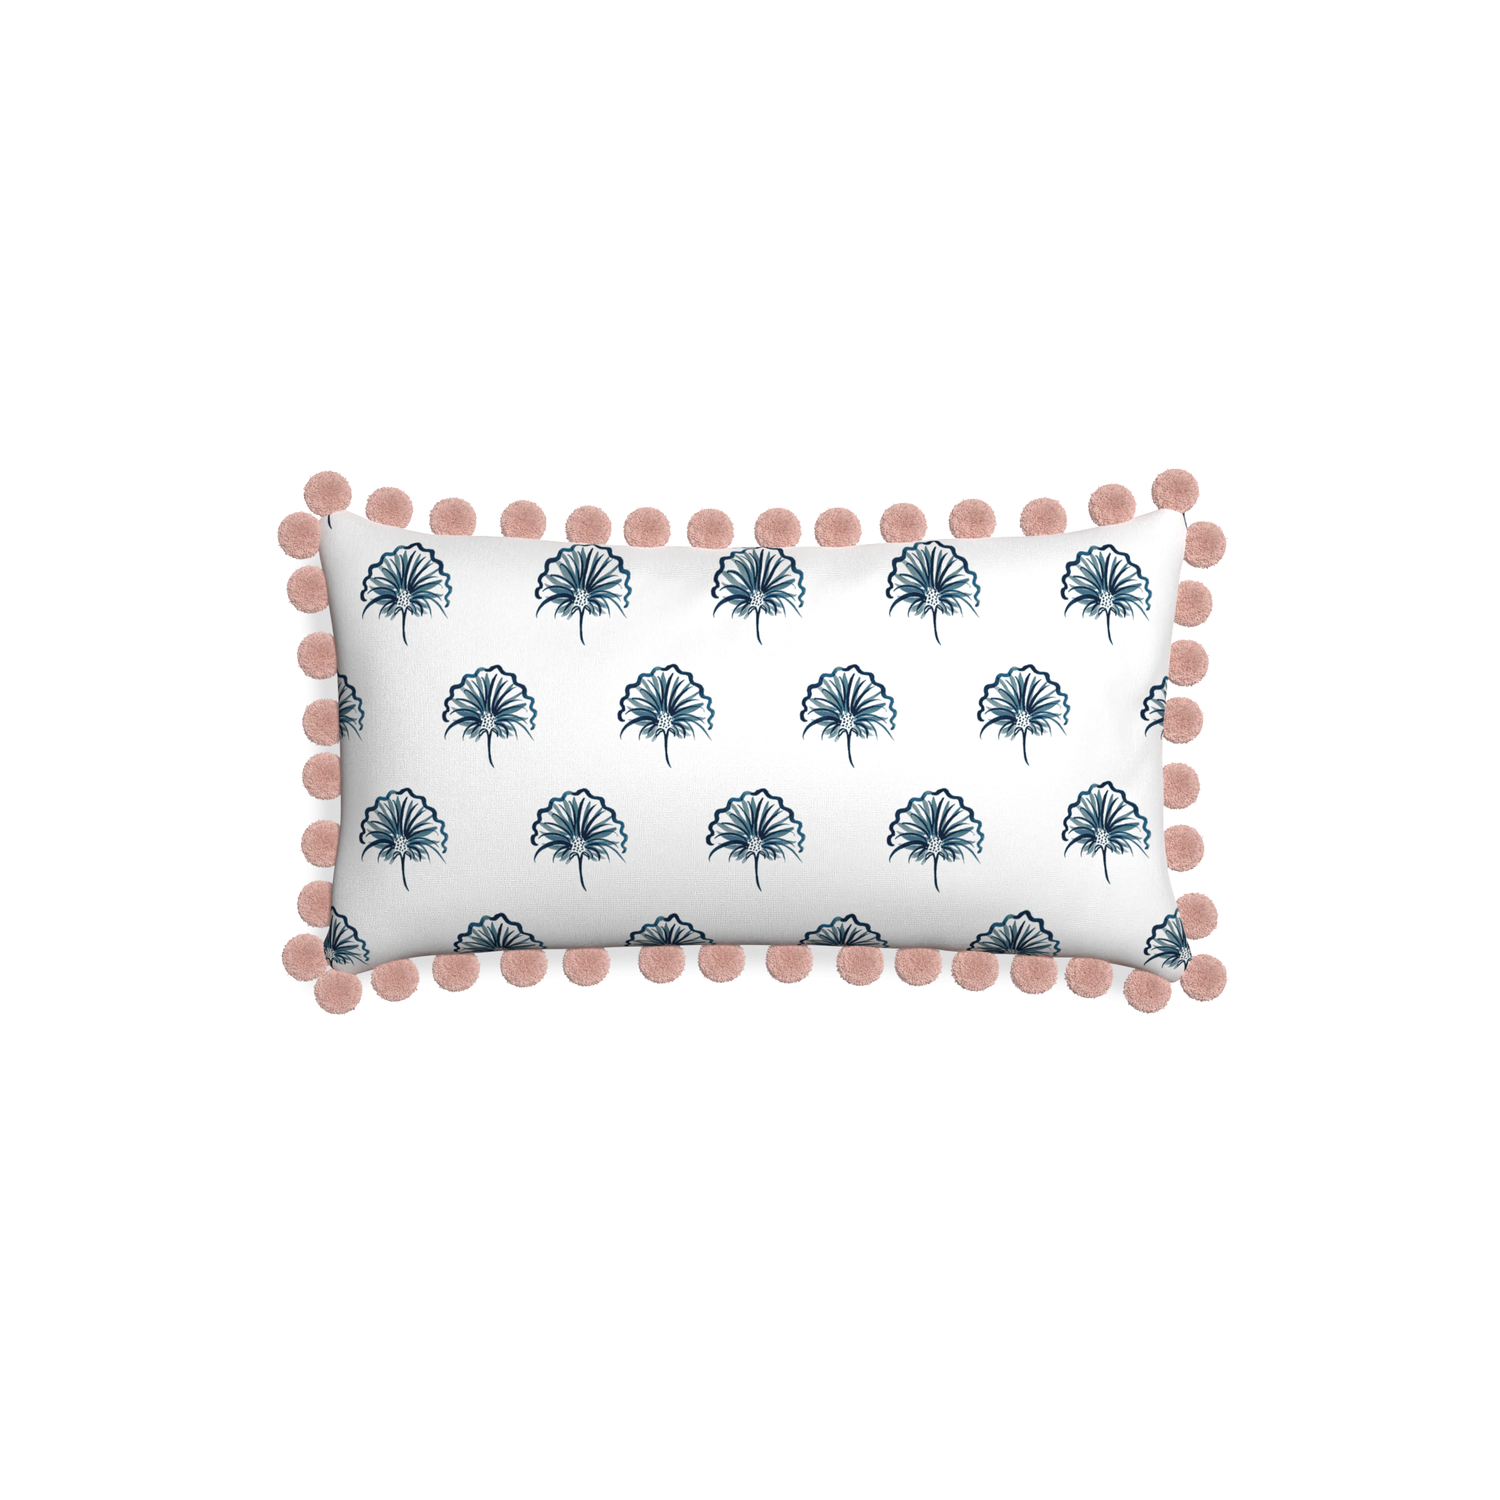 Petite-lumbar penelope midnight custom floral navypillow with rose pom pom on white background